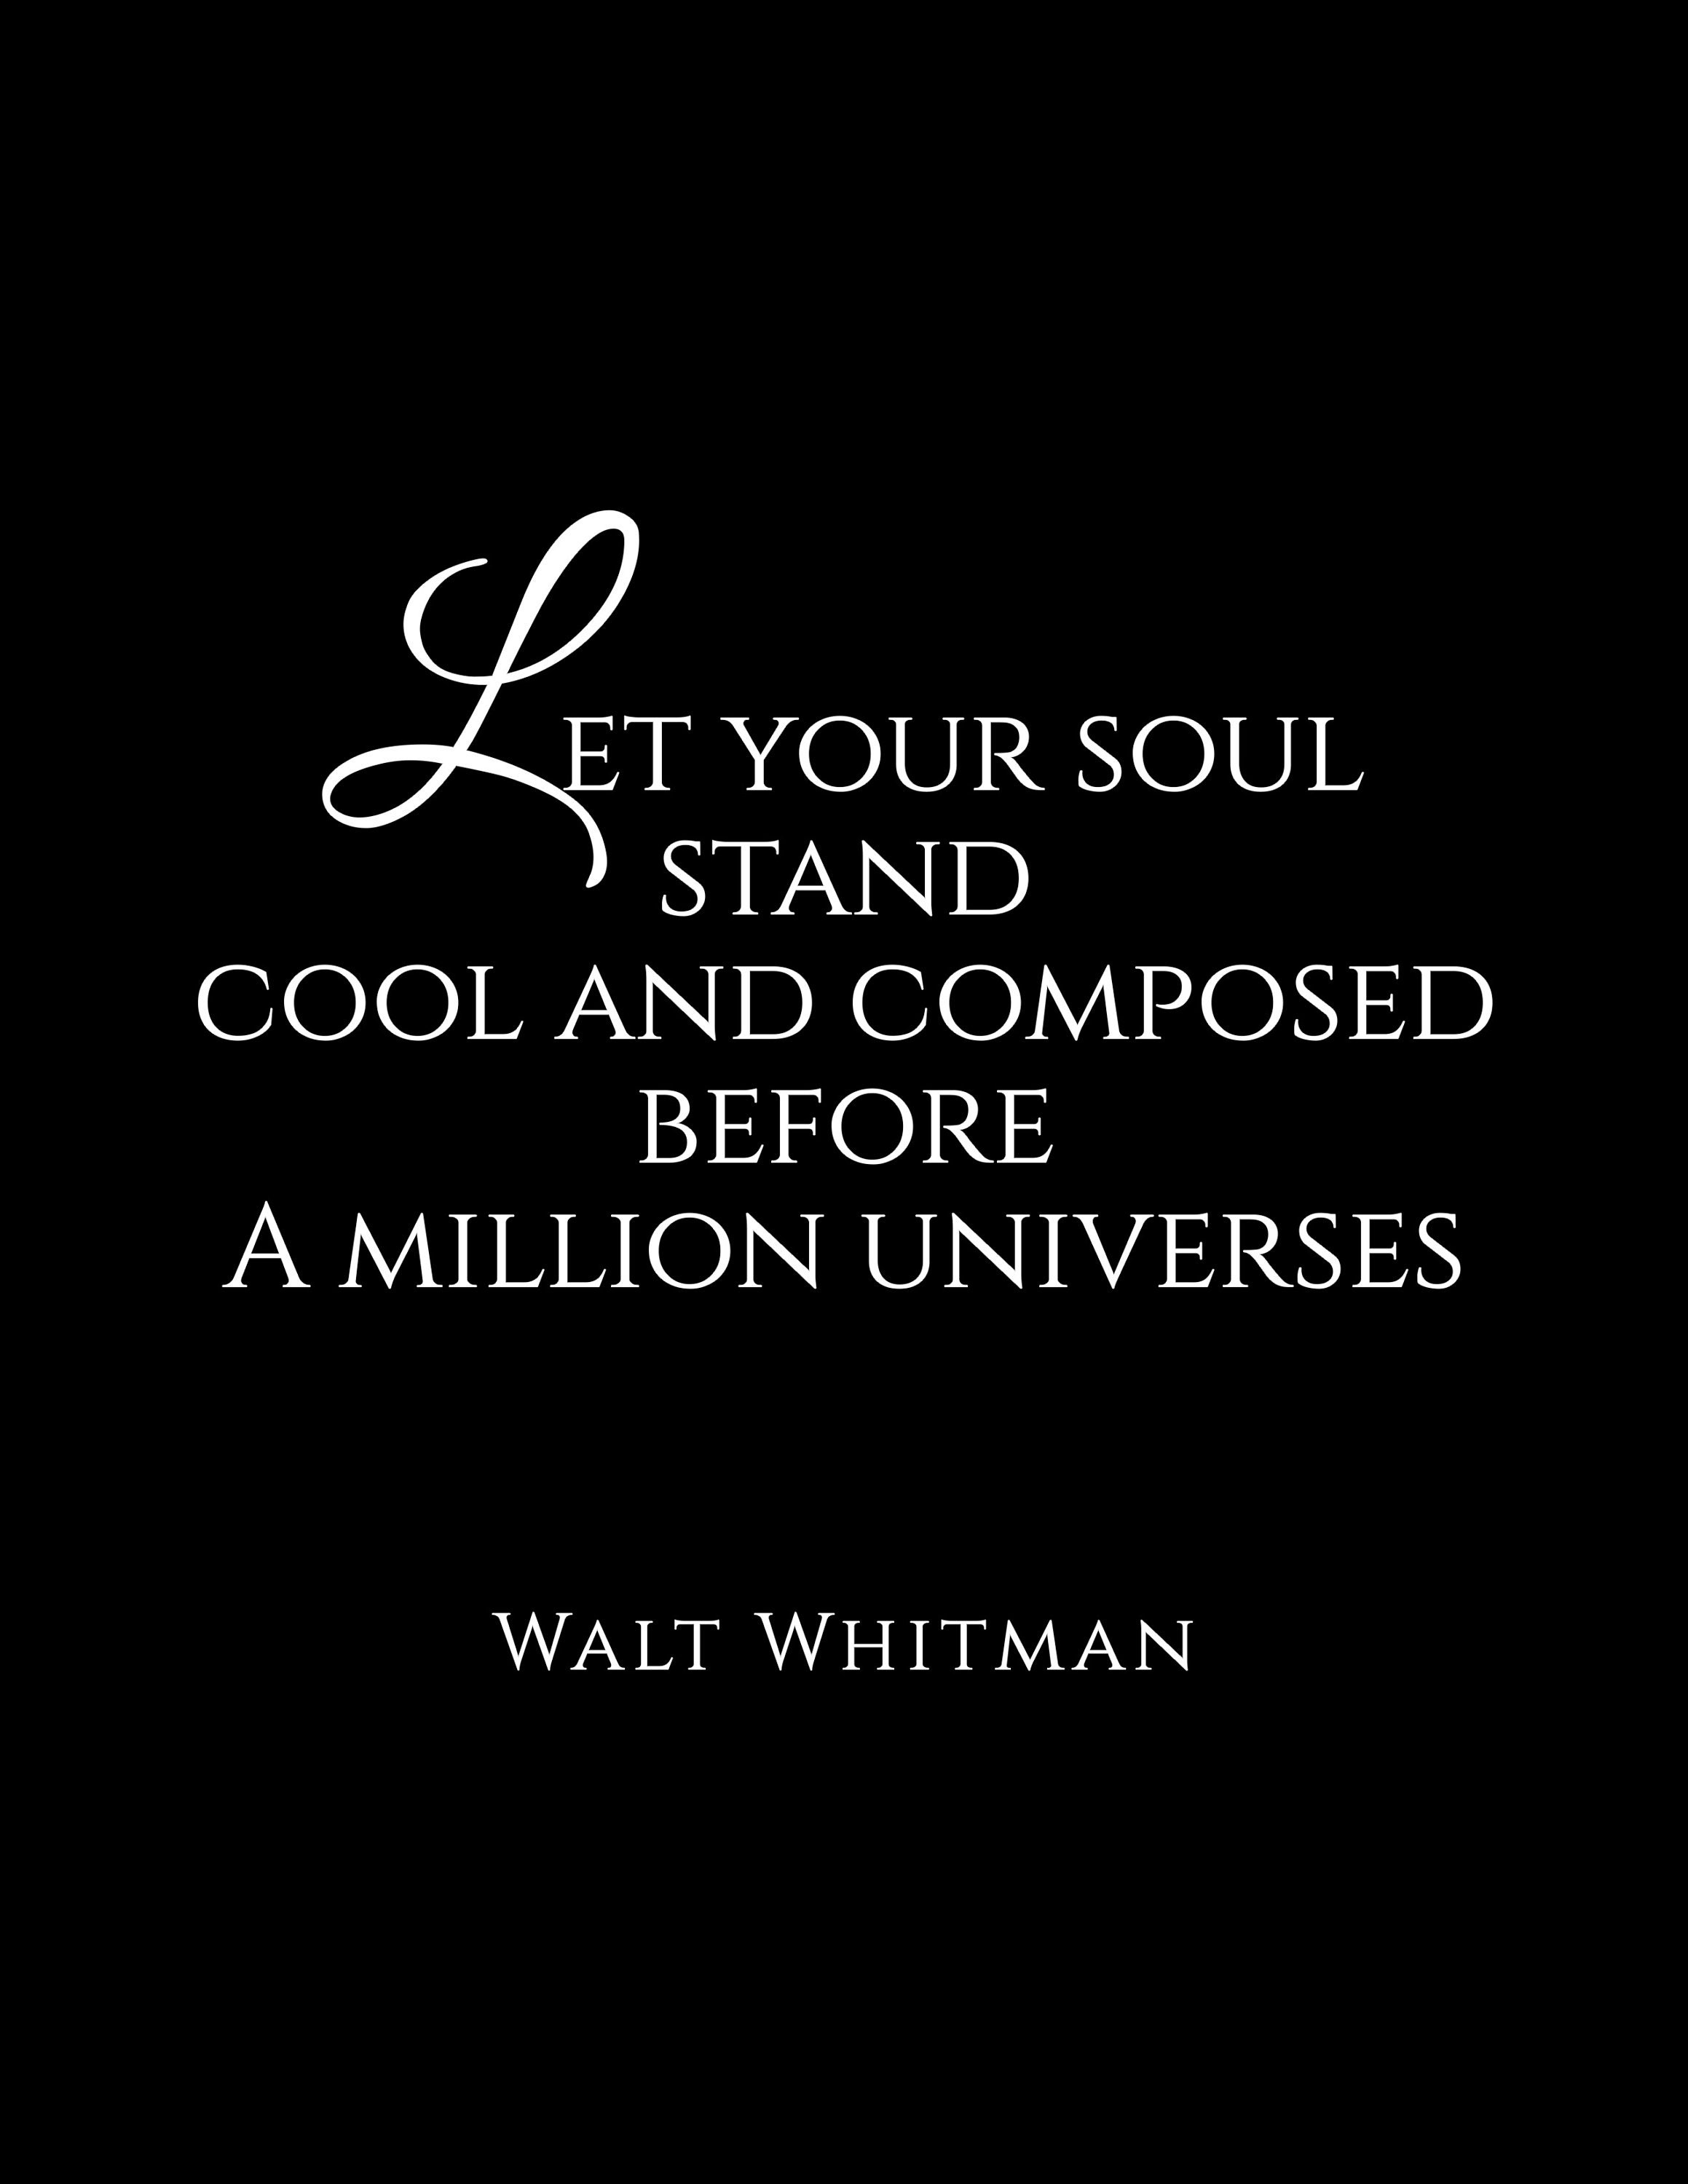 Let Your Soul Stand Cool and Composed Quote Walt Whitman - Etsy